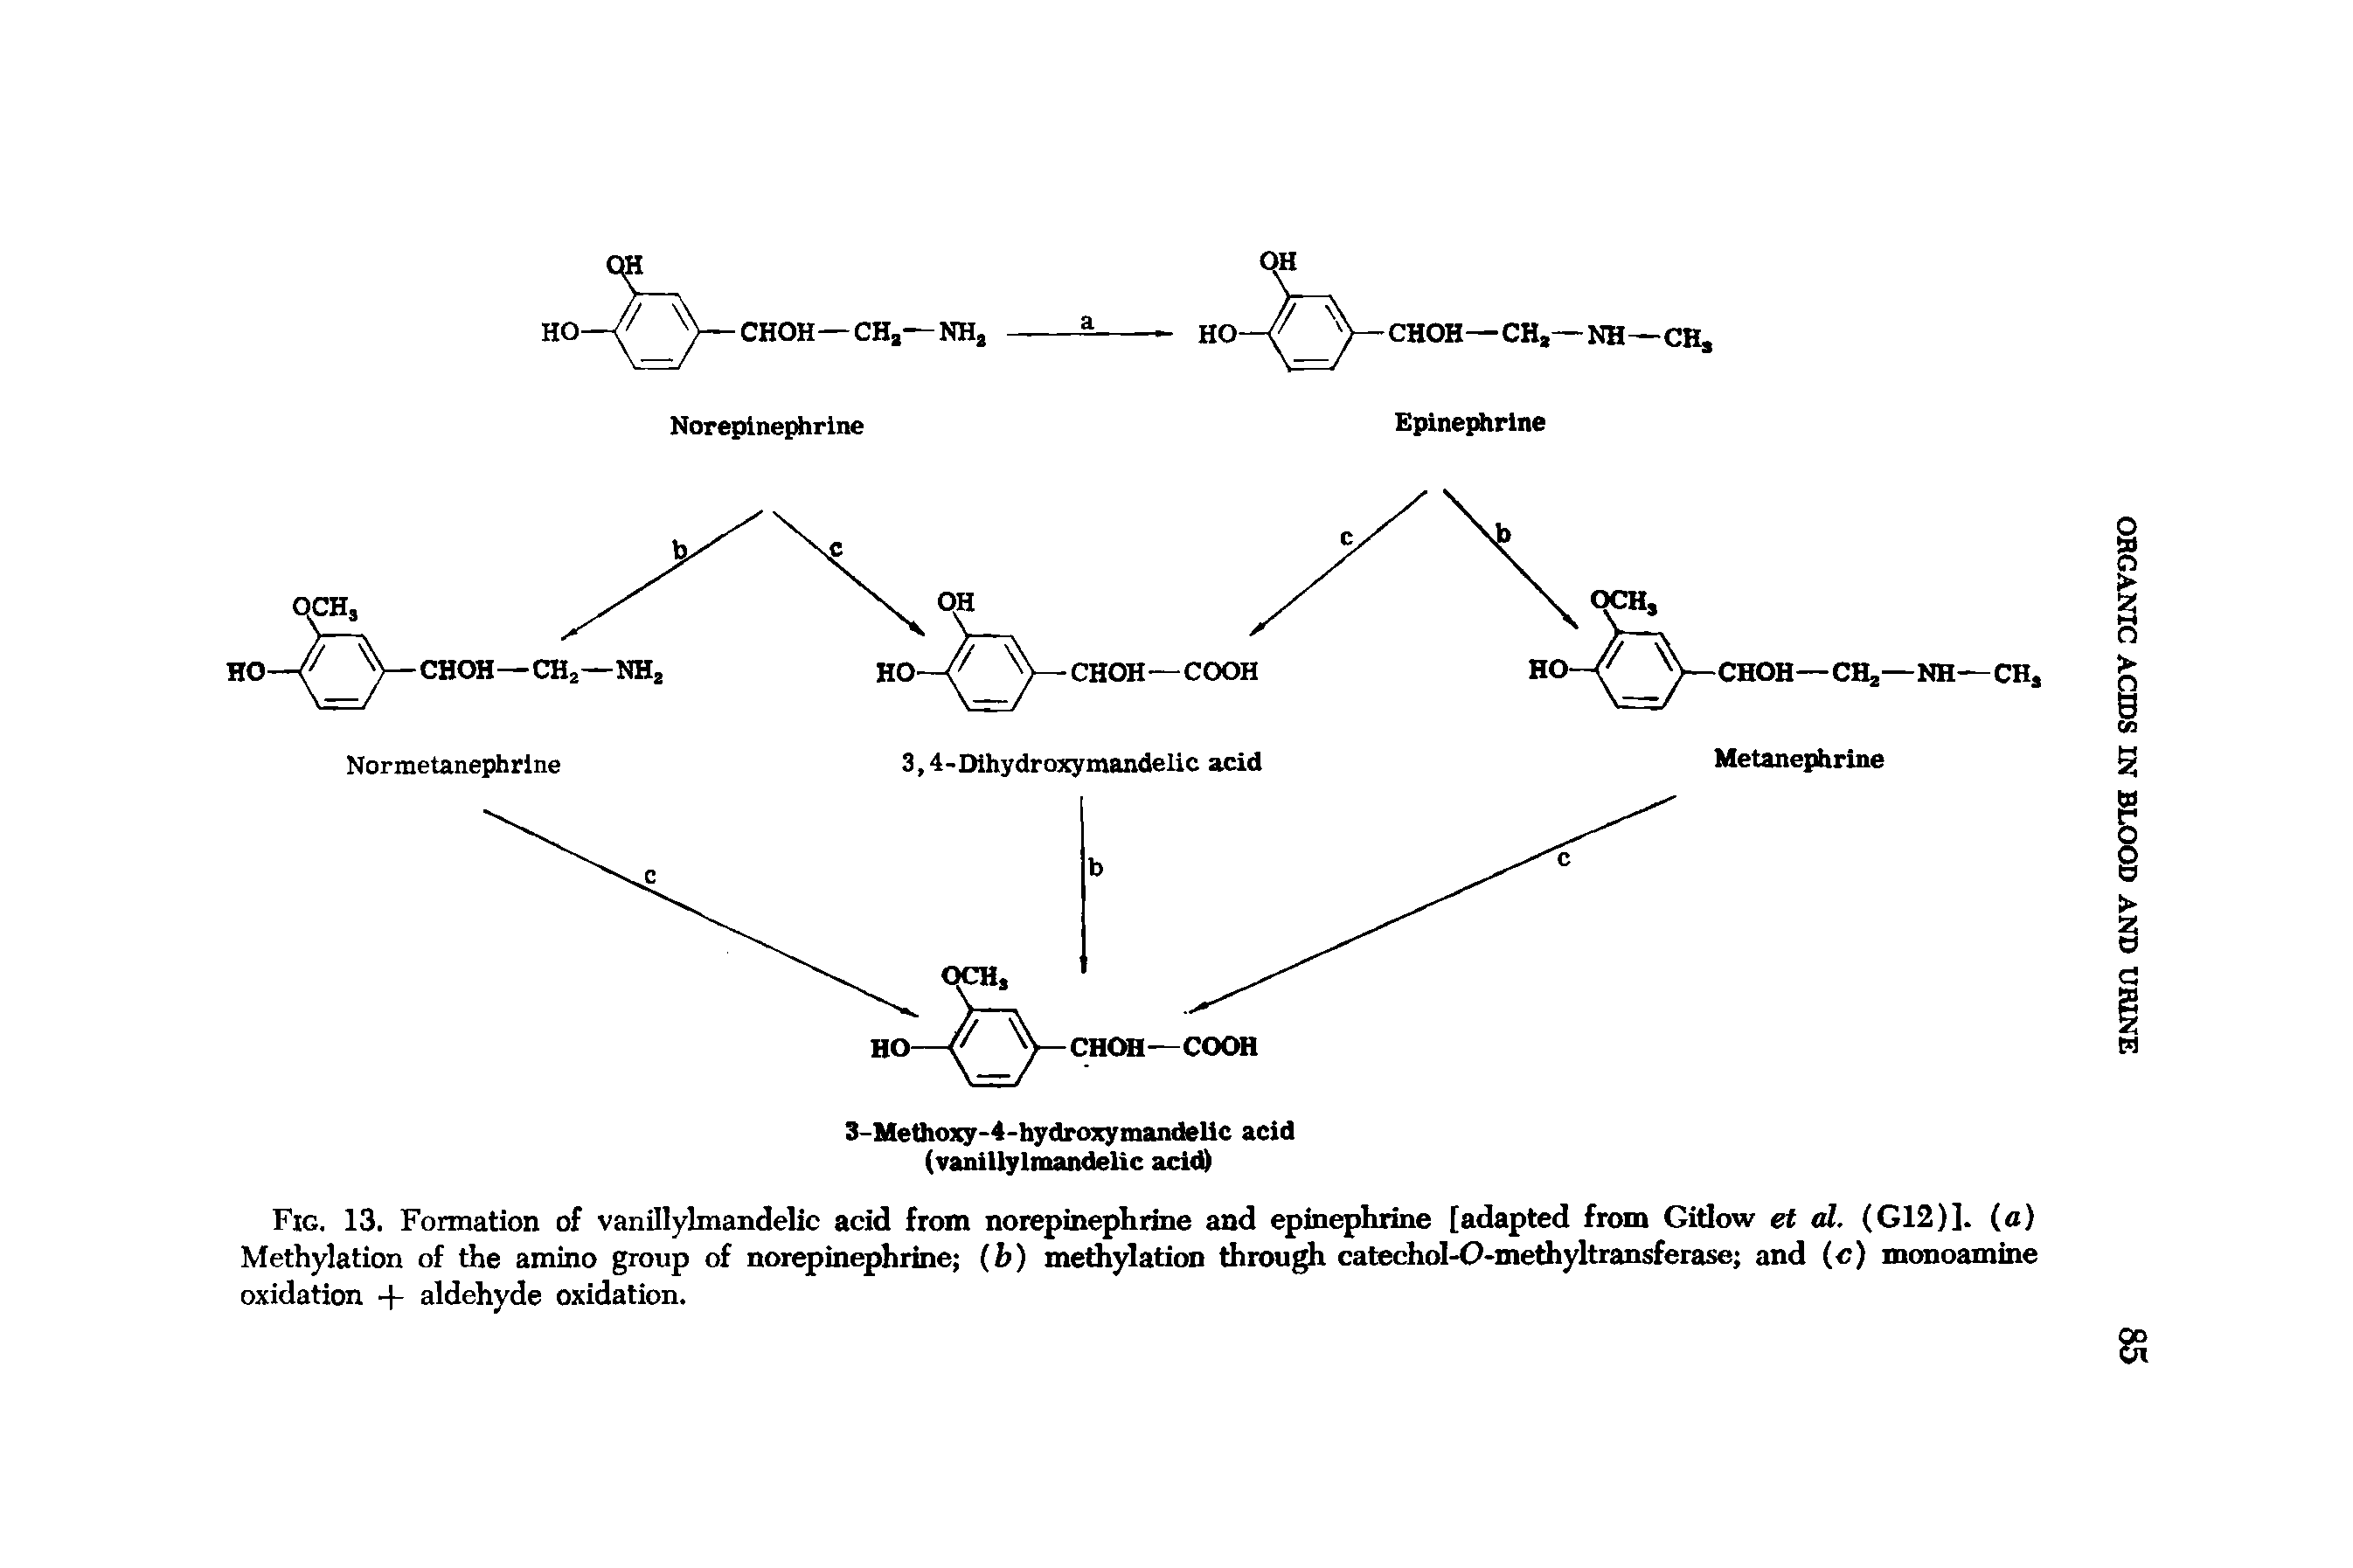 Fig. 13. Formation of vanillylmandelic acid from norepinephrine and epinephrine [adapted from Gidow et ti. (G12)]. (a) Methylation of the amino group of norepinephrine (h) methylation through catechol-O-methyltransferase and (c) monoamine oxidation + aldehyde oxidation.